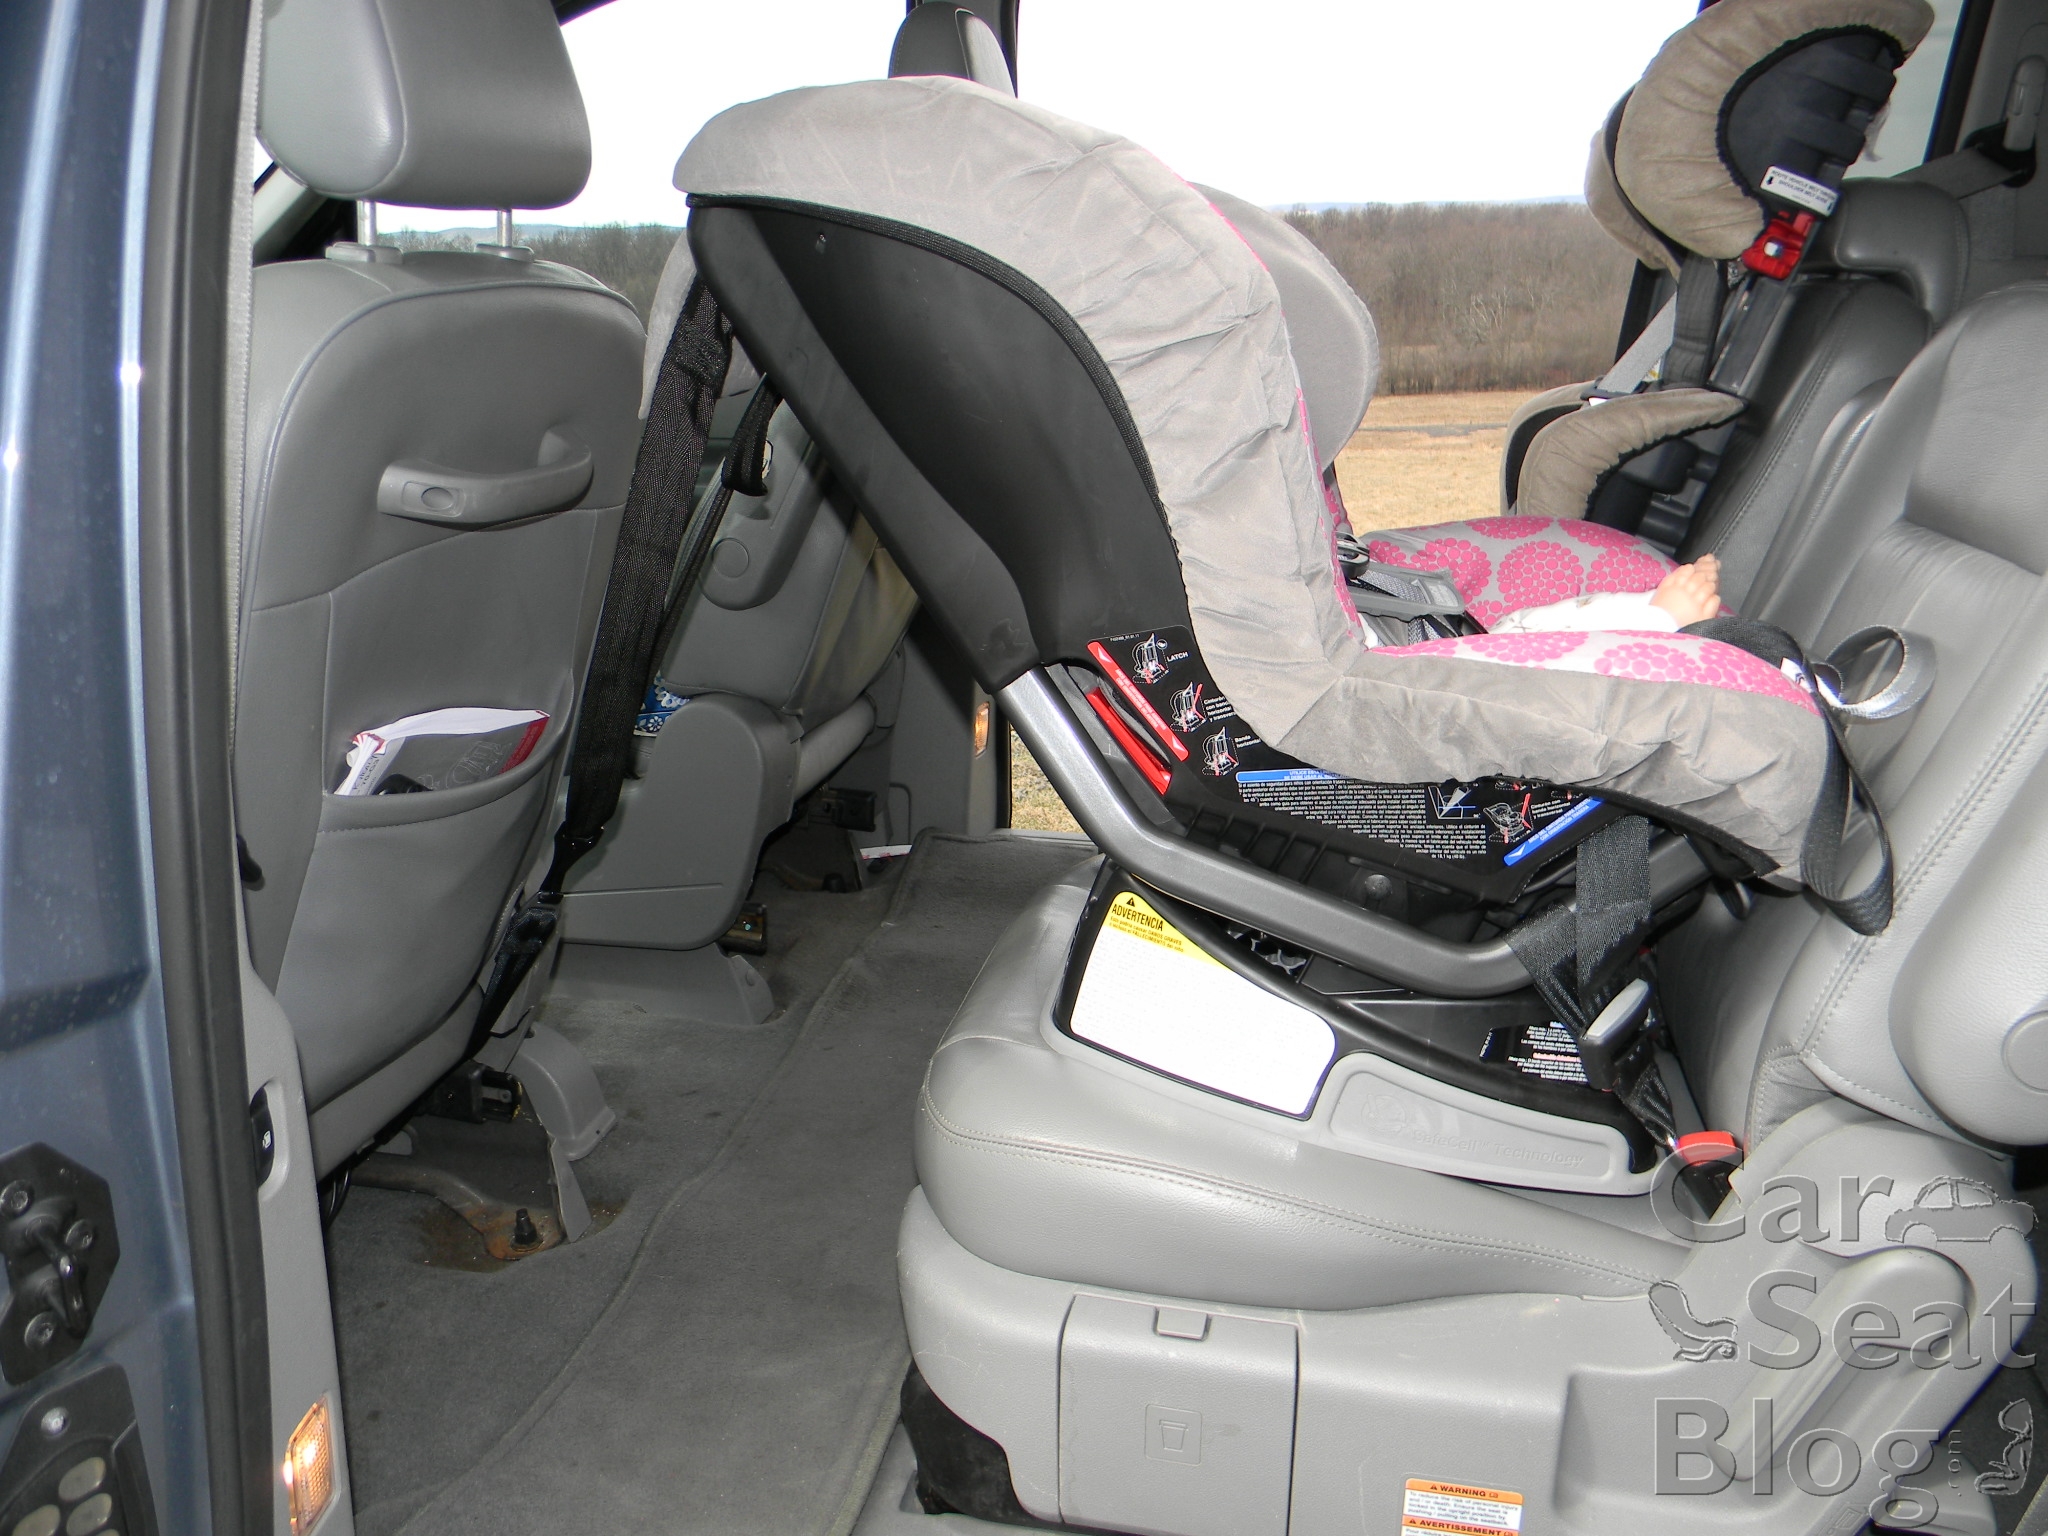 How to Use Rear-Facing Tether – CarseatBlog